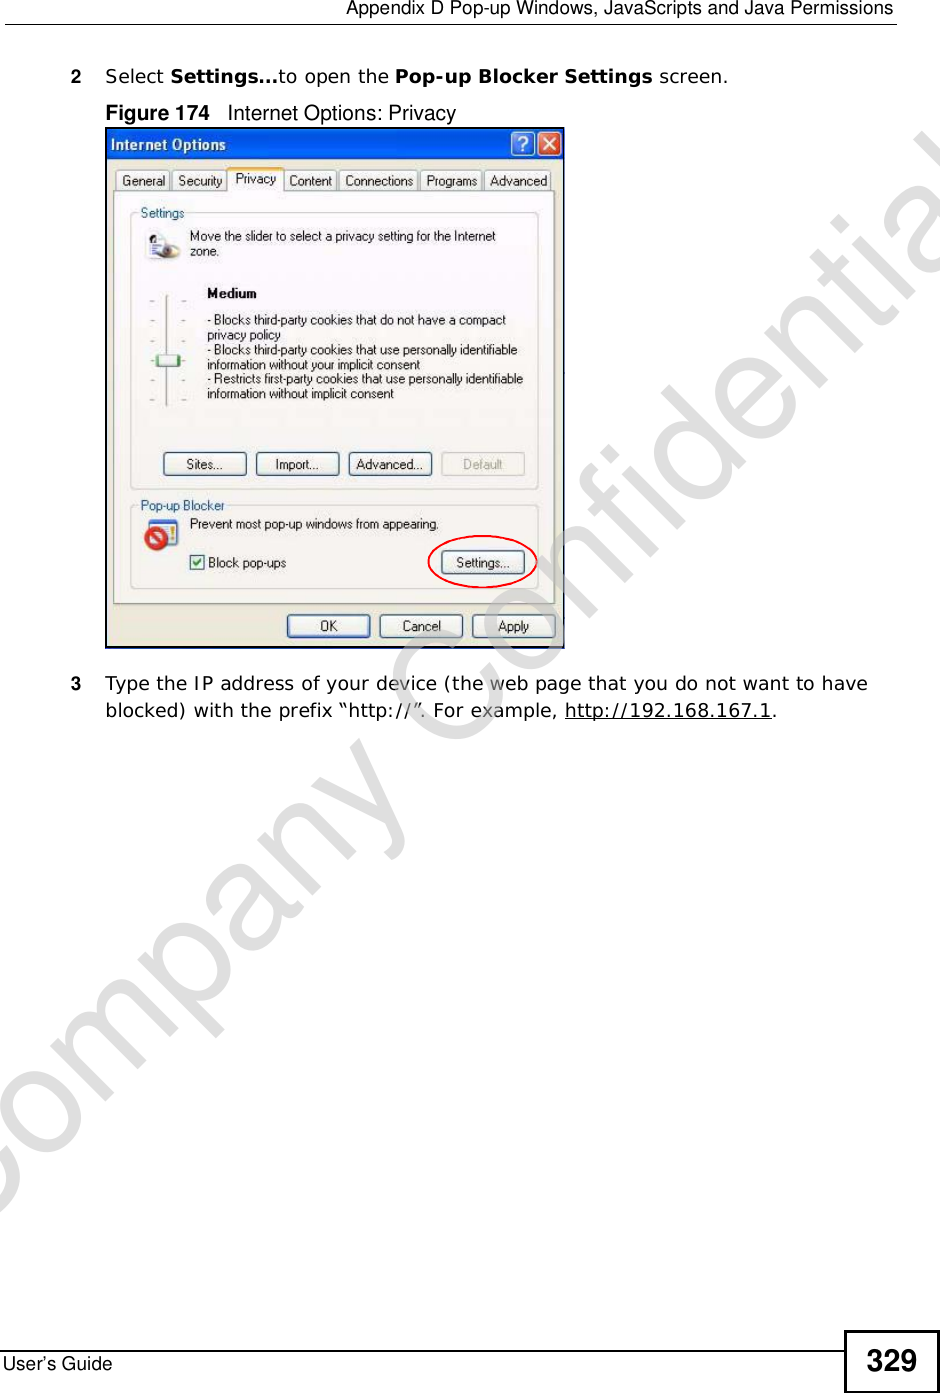  Appendix DPop-up Windows, JavaScripts and Java PermissionsUser’s Guide 3292Select Settings…to open the Pop-up Blocker Settings screen.Figure 174   Internet Options: Privacy3Type the IP address of your device (the web page that you do not want to have blocked) with the prefix “http://”. For example, http://192.168.167.1. Company Confidential